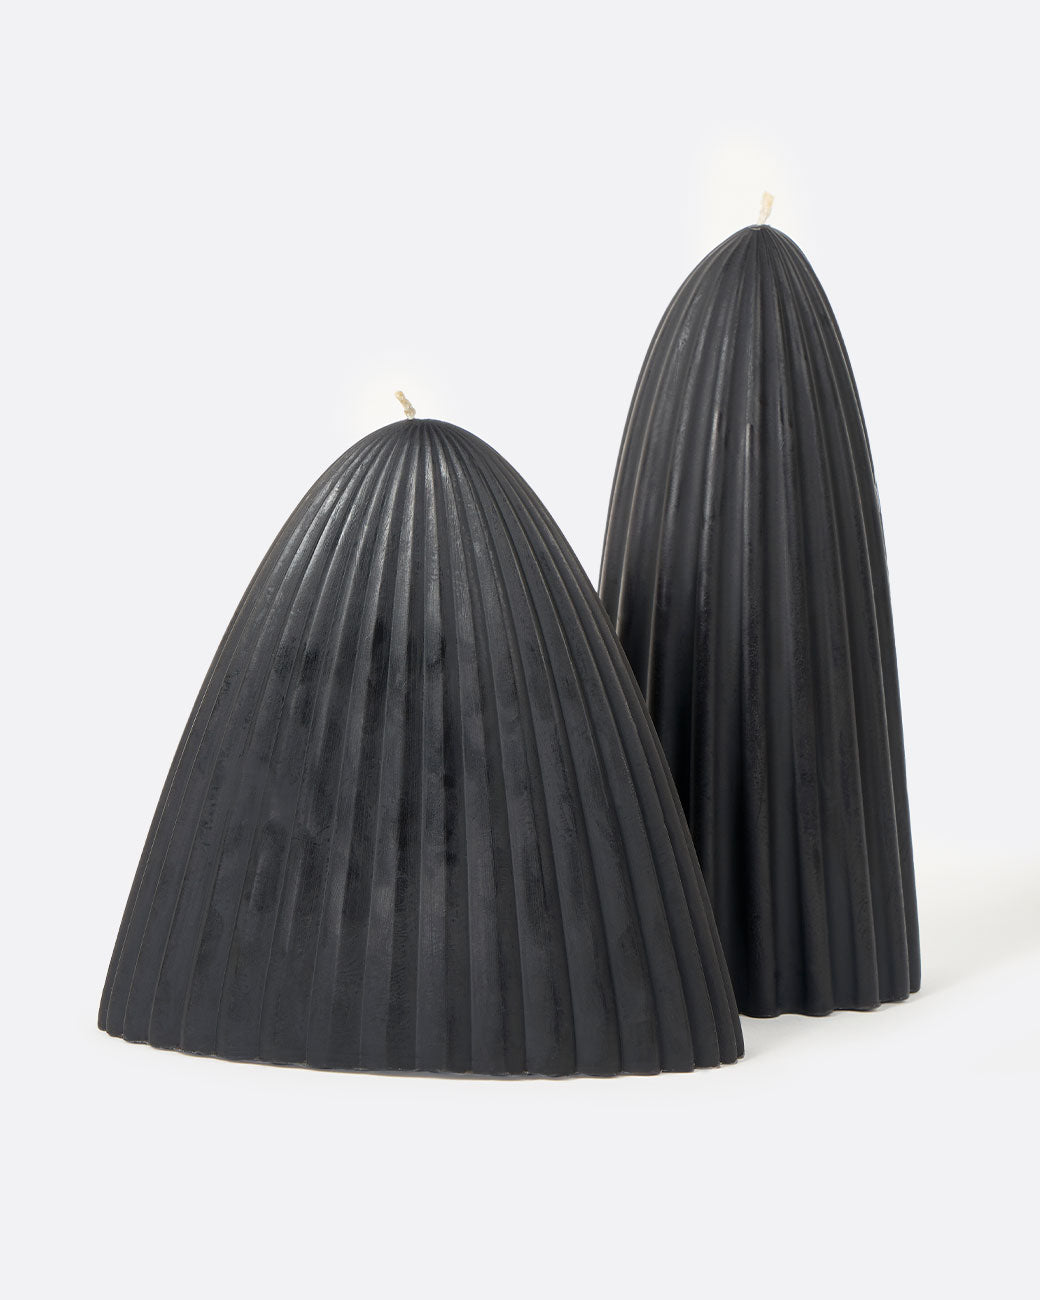 Two black natural beeswax tusk candles, one short and wide and the other narrow and tall.